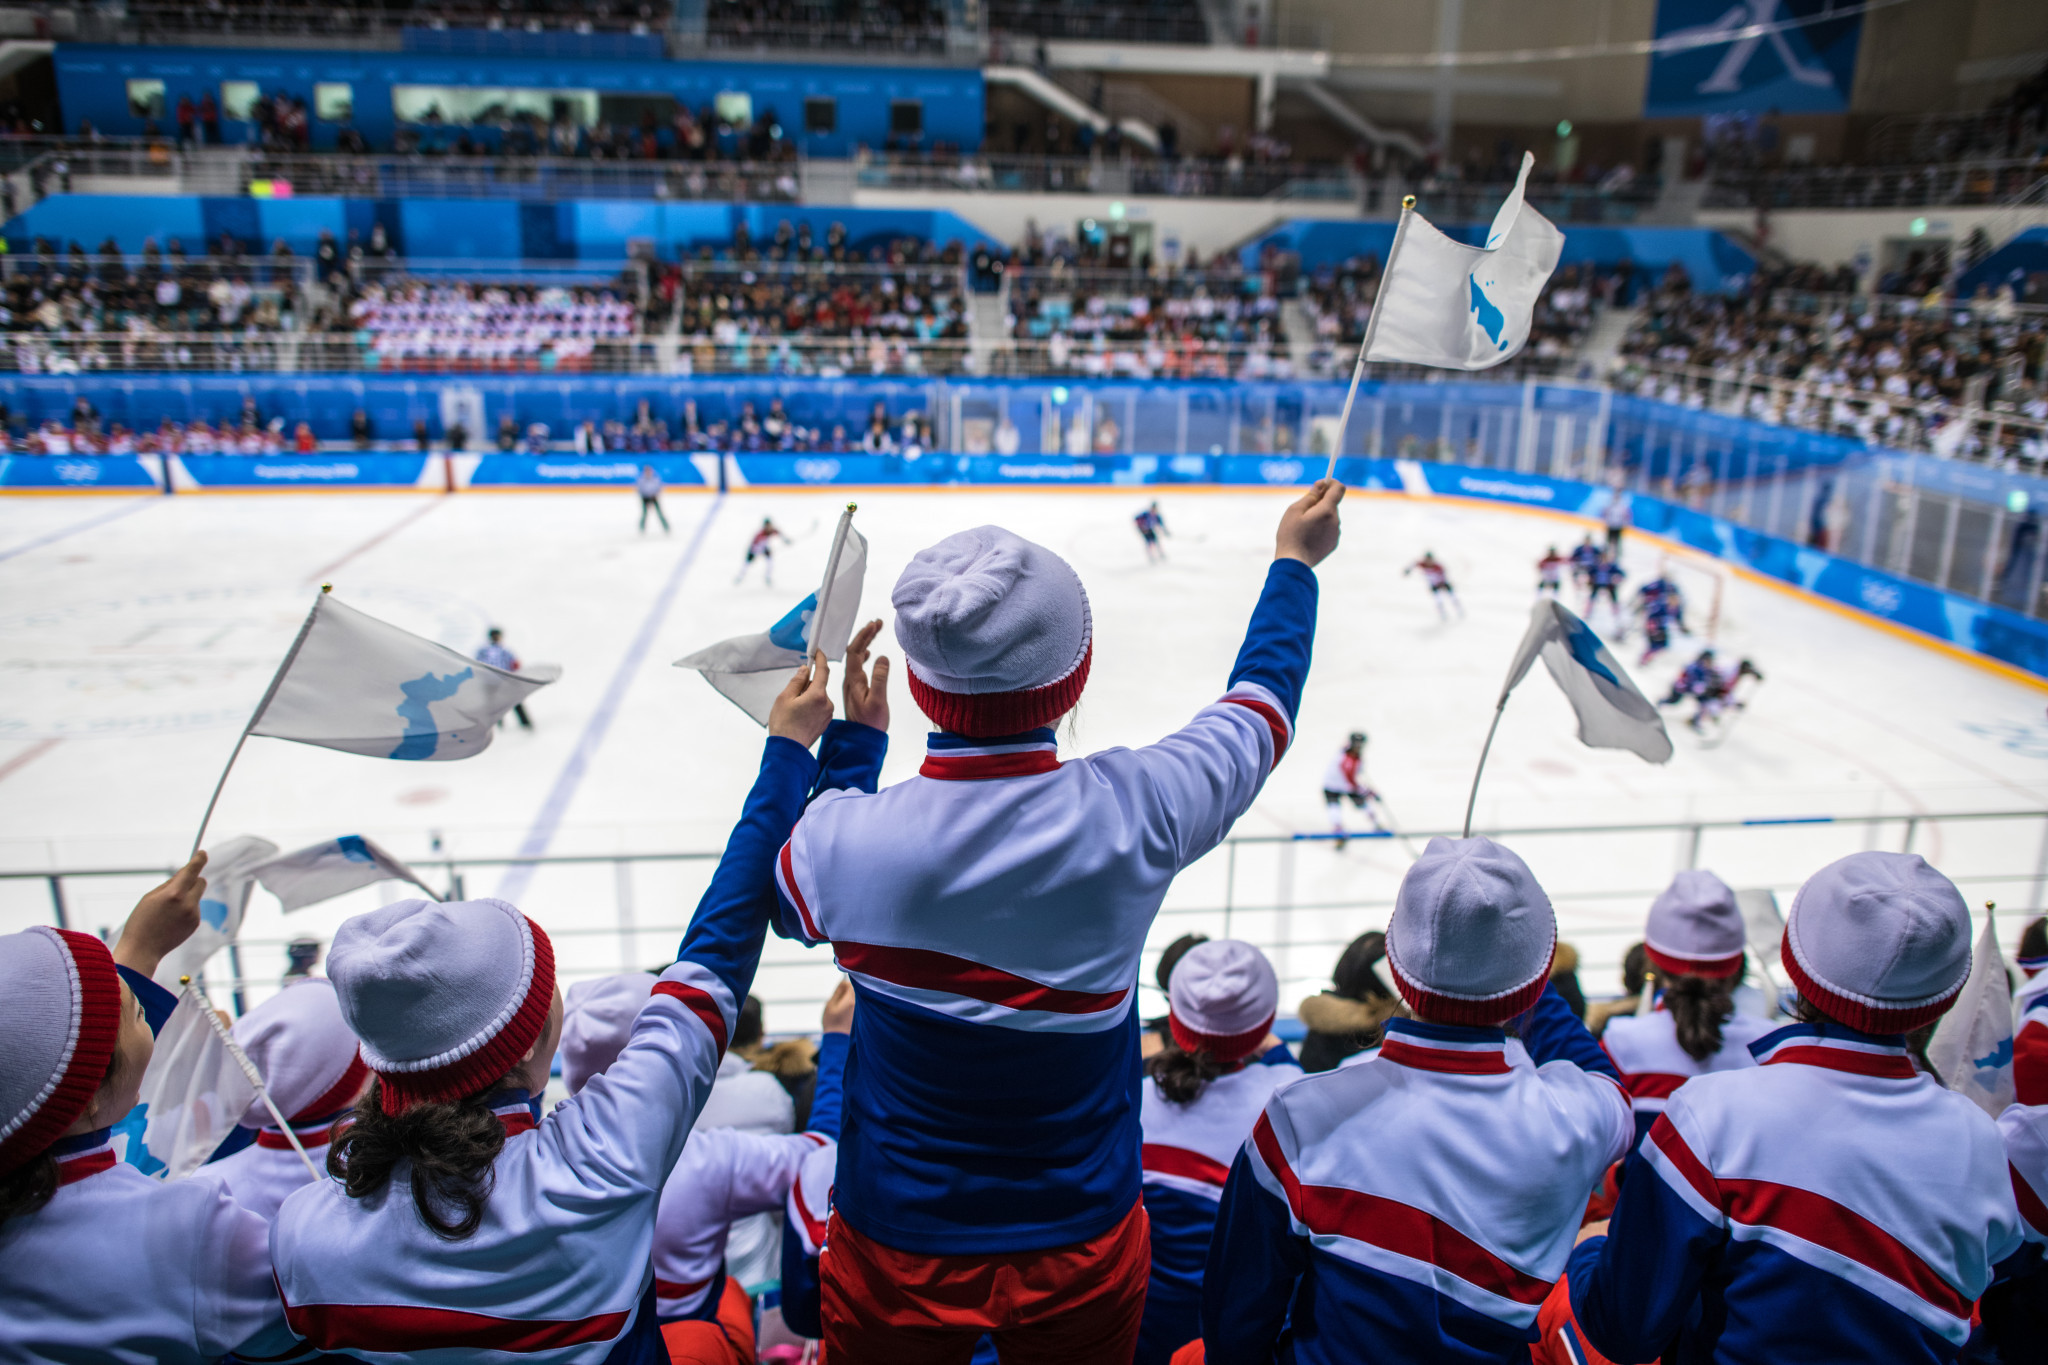 A unified Korean women's ice hockey team took part at the 2018 Winter Olympics in Pyeongchang ©Getty Images